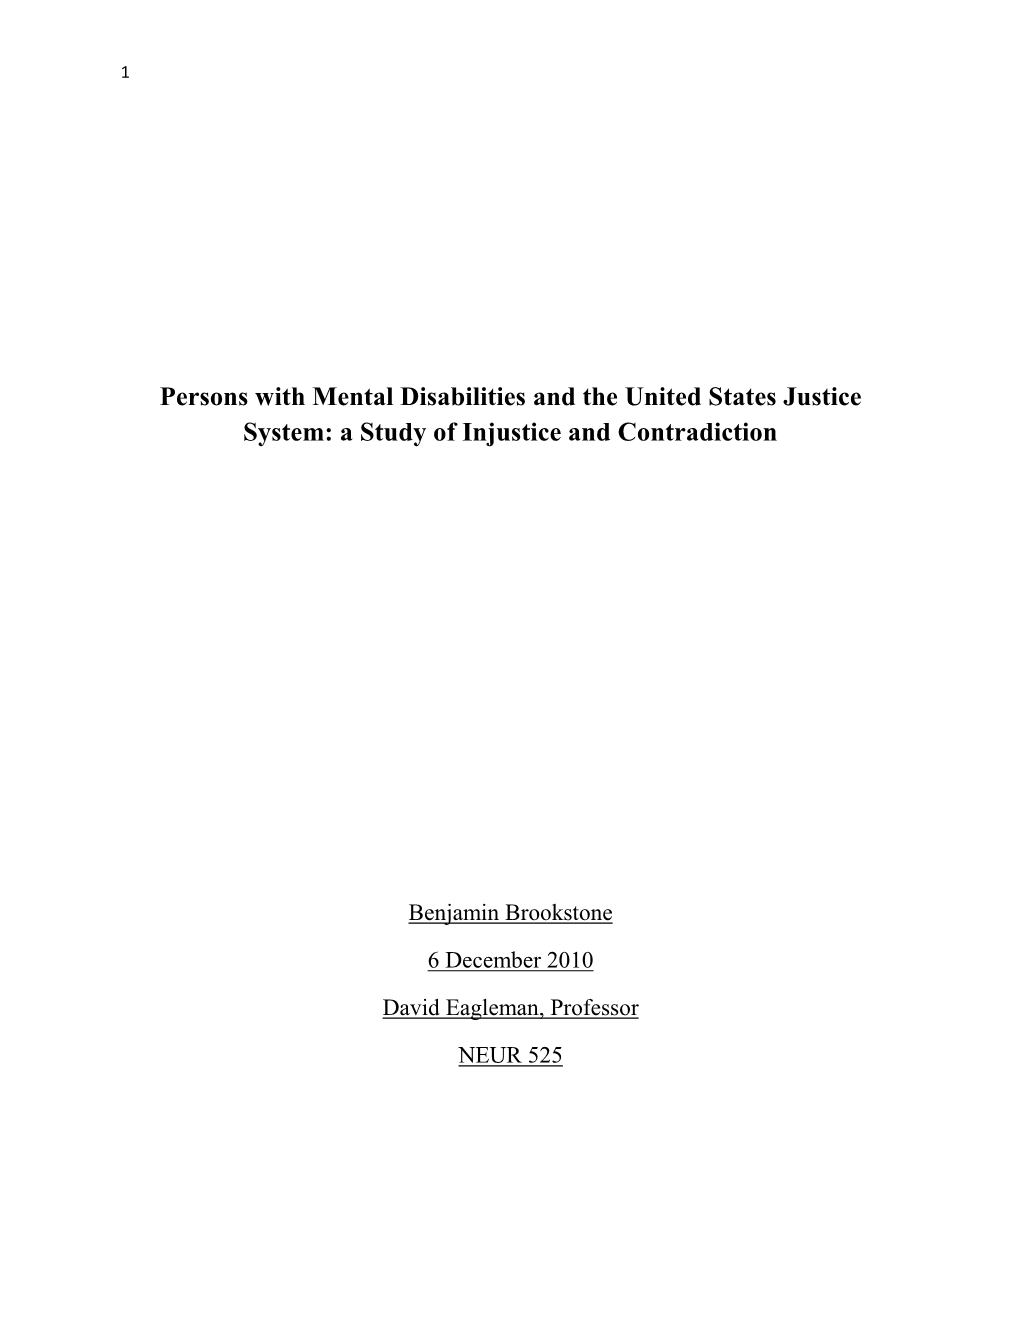 Persons with Mental Disabilities and the United States Justice System: a Study of Injustice and Contradiction